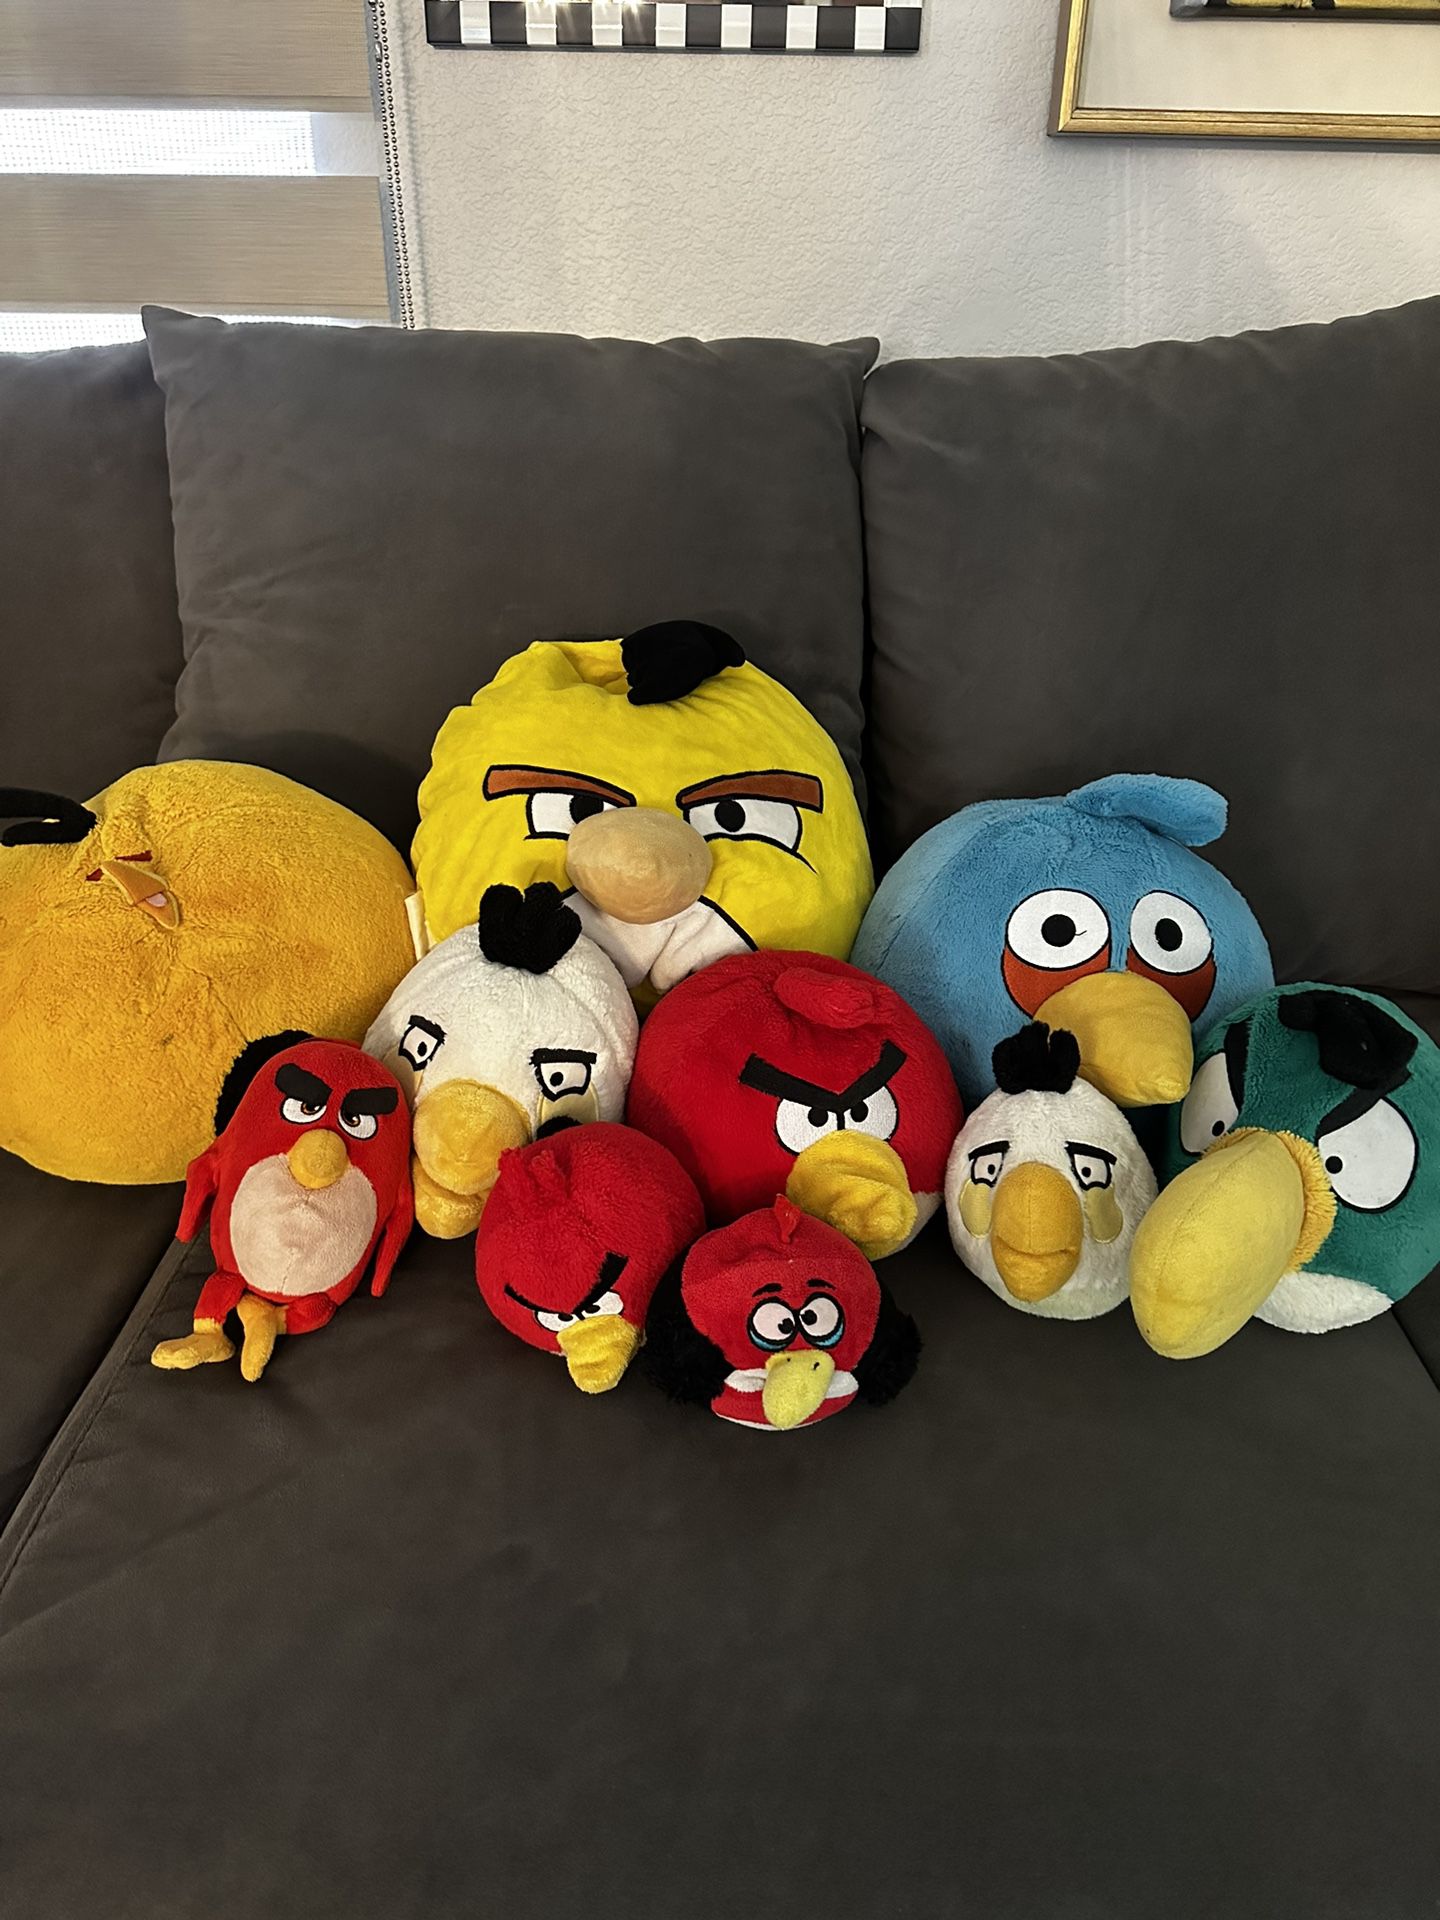 10 Angry Birds Plushies